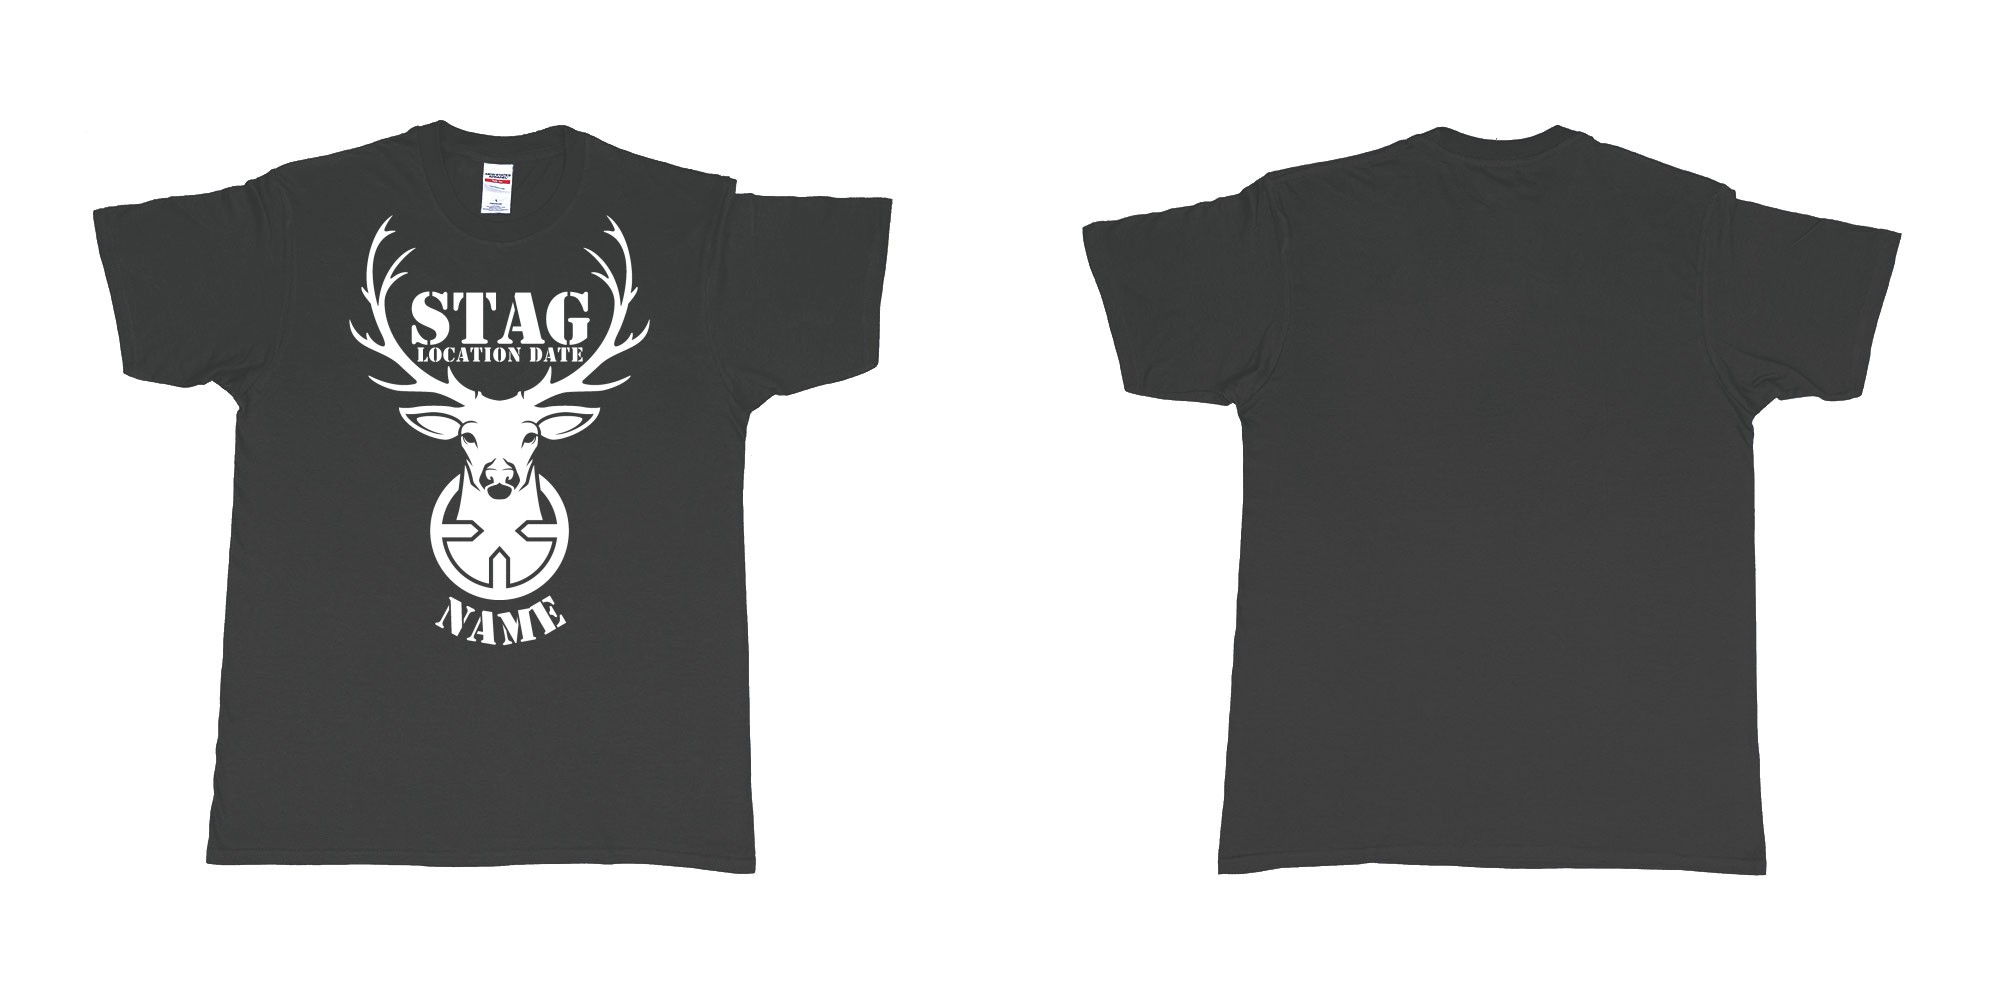 Custom tshirt design  in fabric color black choice your own text made in Bali by The Pirate Way